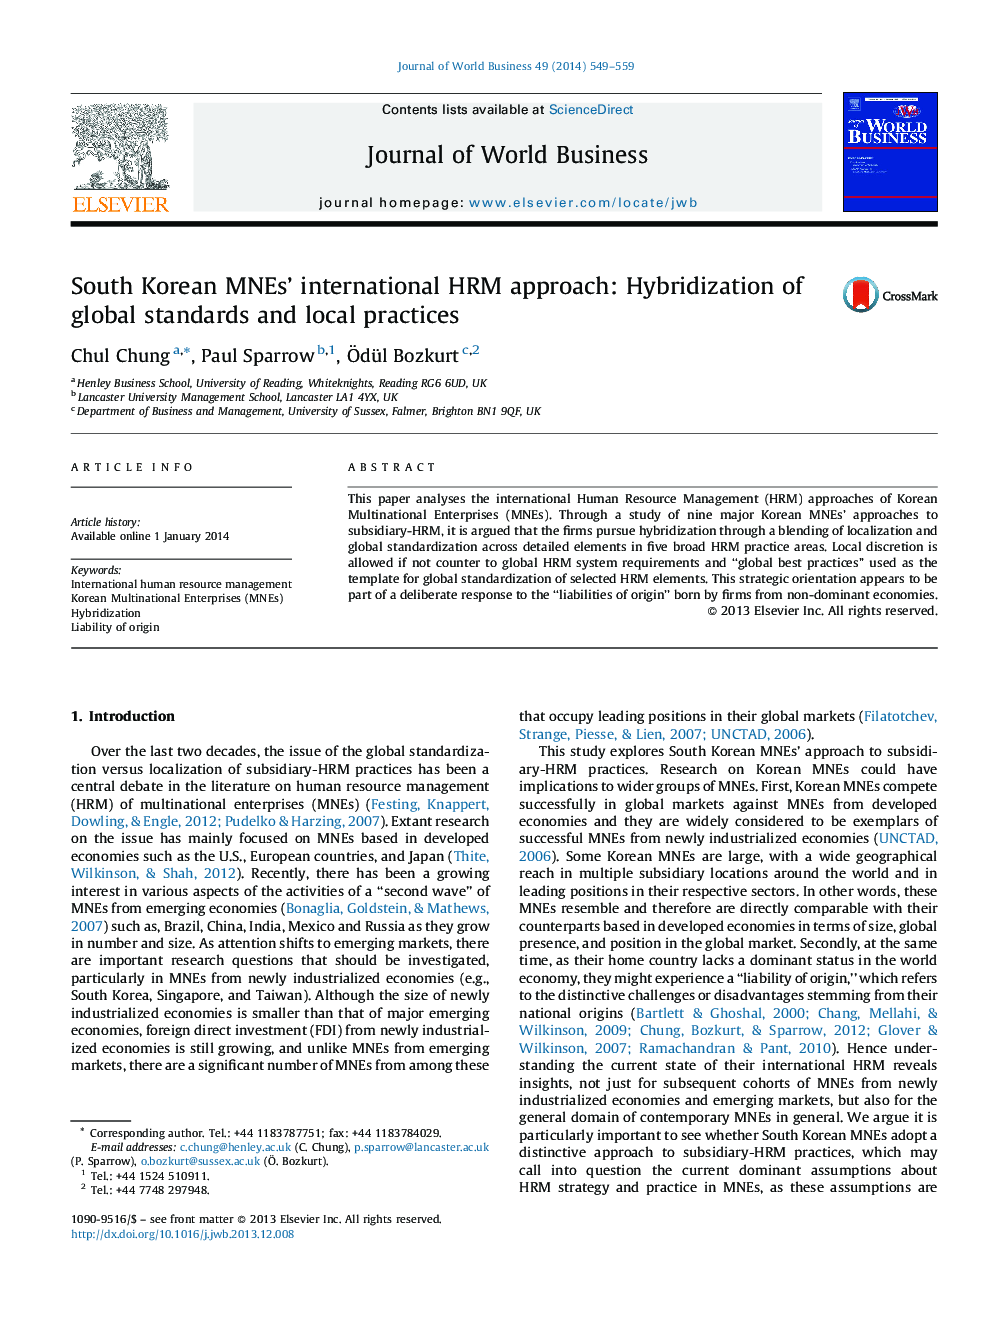 South Korean MNEs’ international HRM approach: Hybridization of global standards and local practices